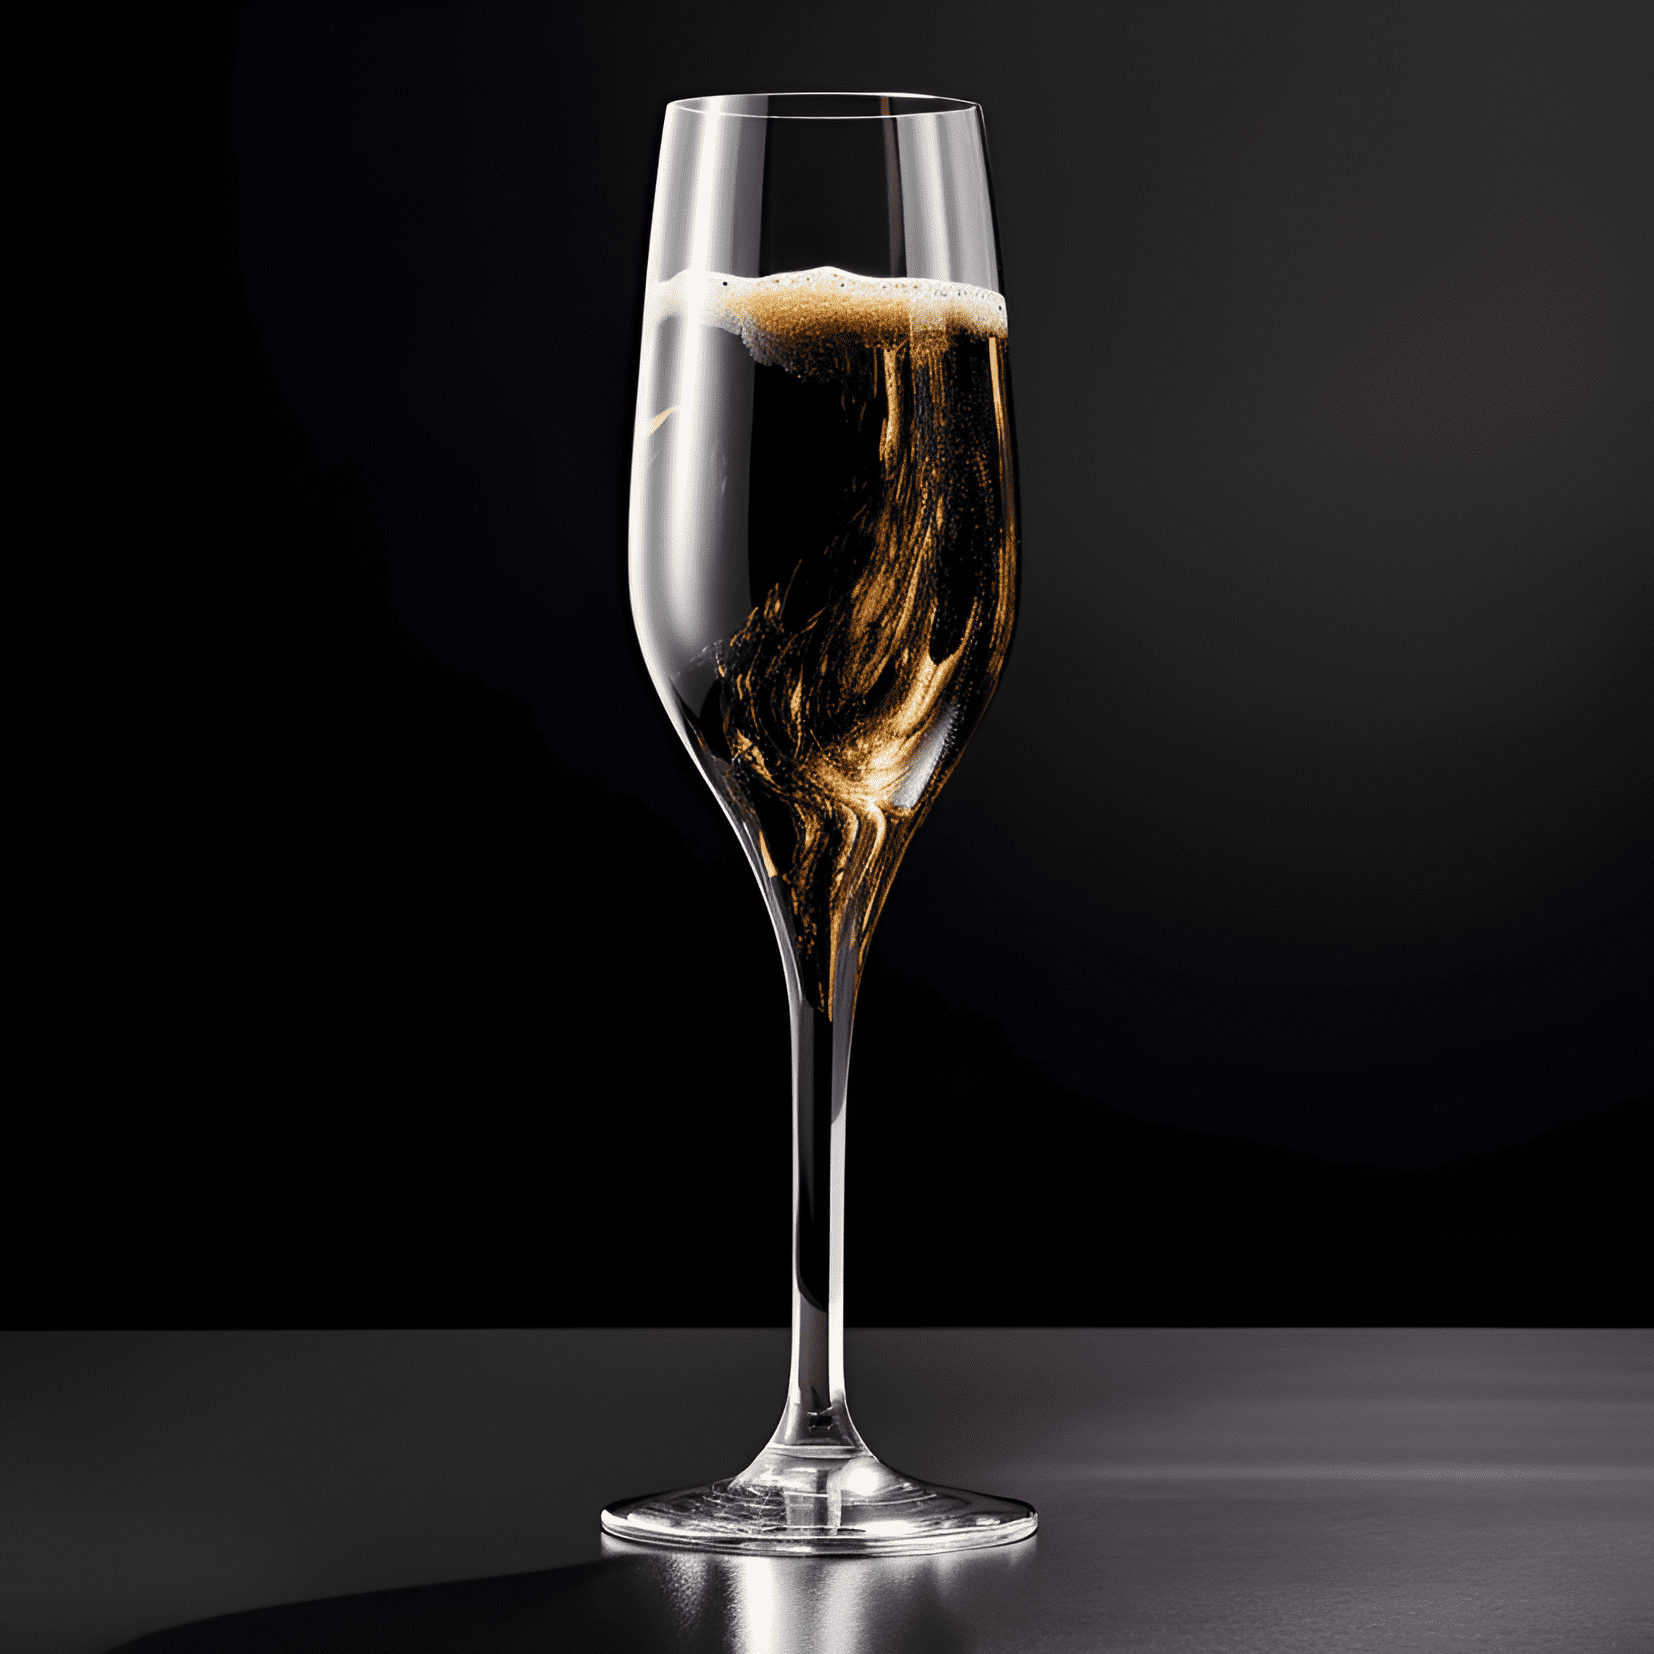 Black Velvet Cocktail Recipe - The Black Velvet cocktail has a rich, velvety, and smooth taste with a hint of sweetness. The combination of the stout and champagne creates a perfect balance of flavors, making it a luxurious and indulgent drink.